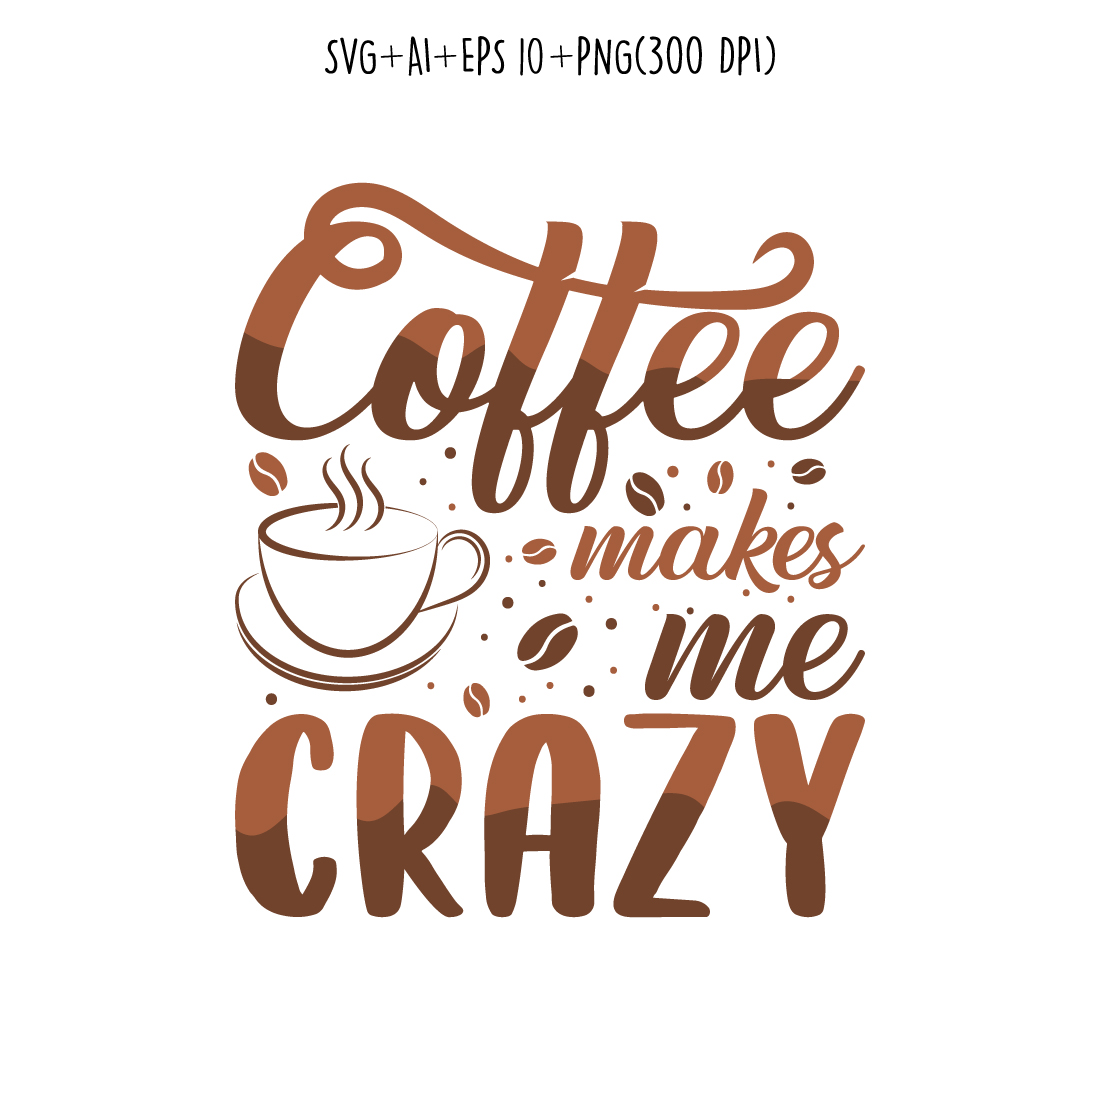 coffee makes me crazy coffee typography design for t-shirts, print, templates, logos, mug preview image.